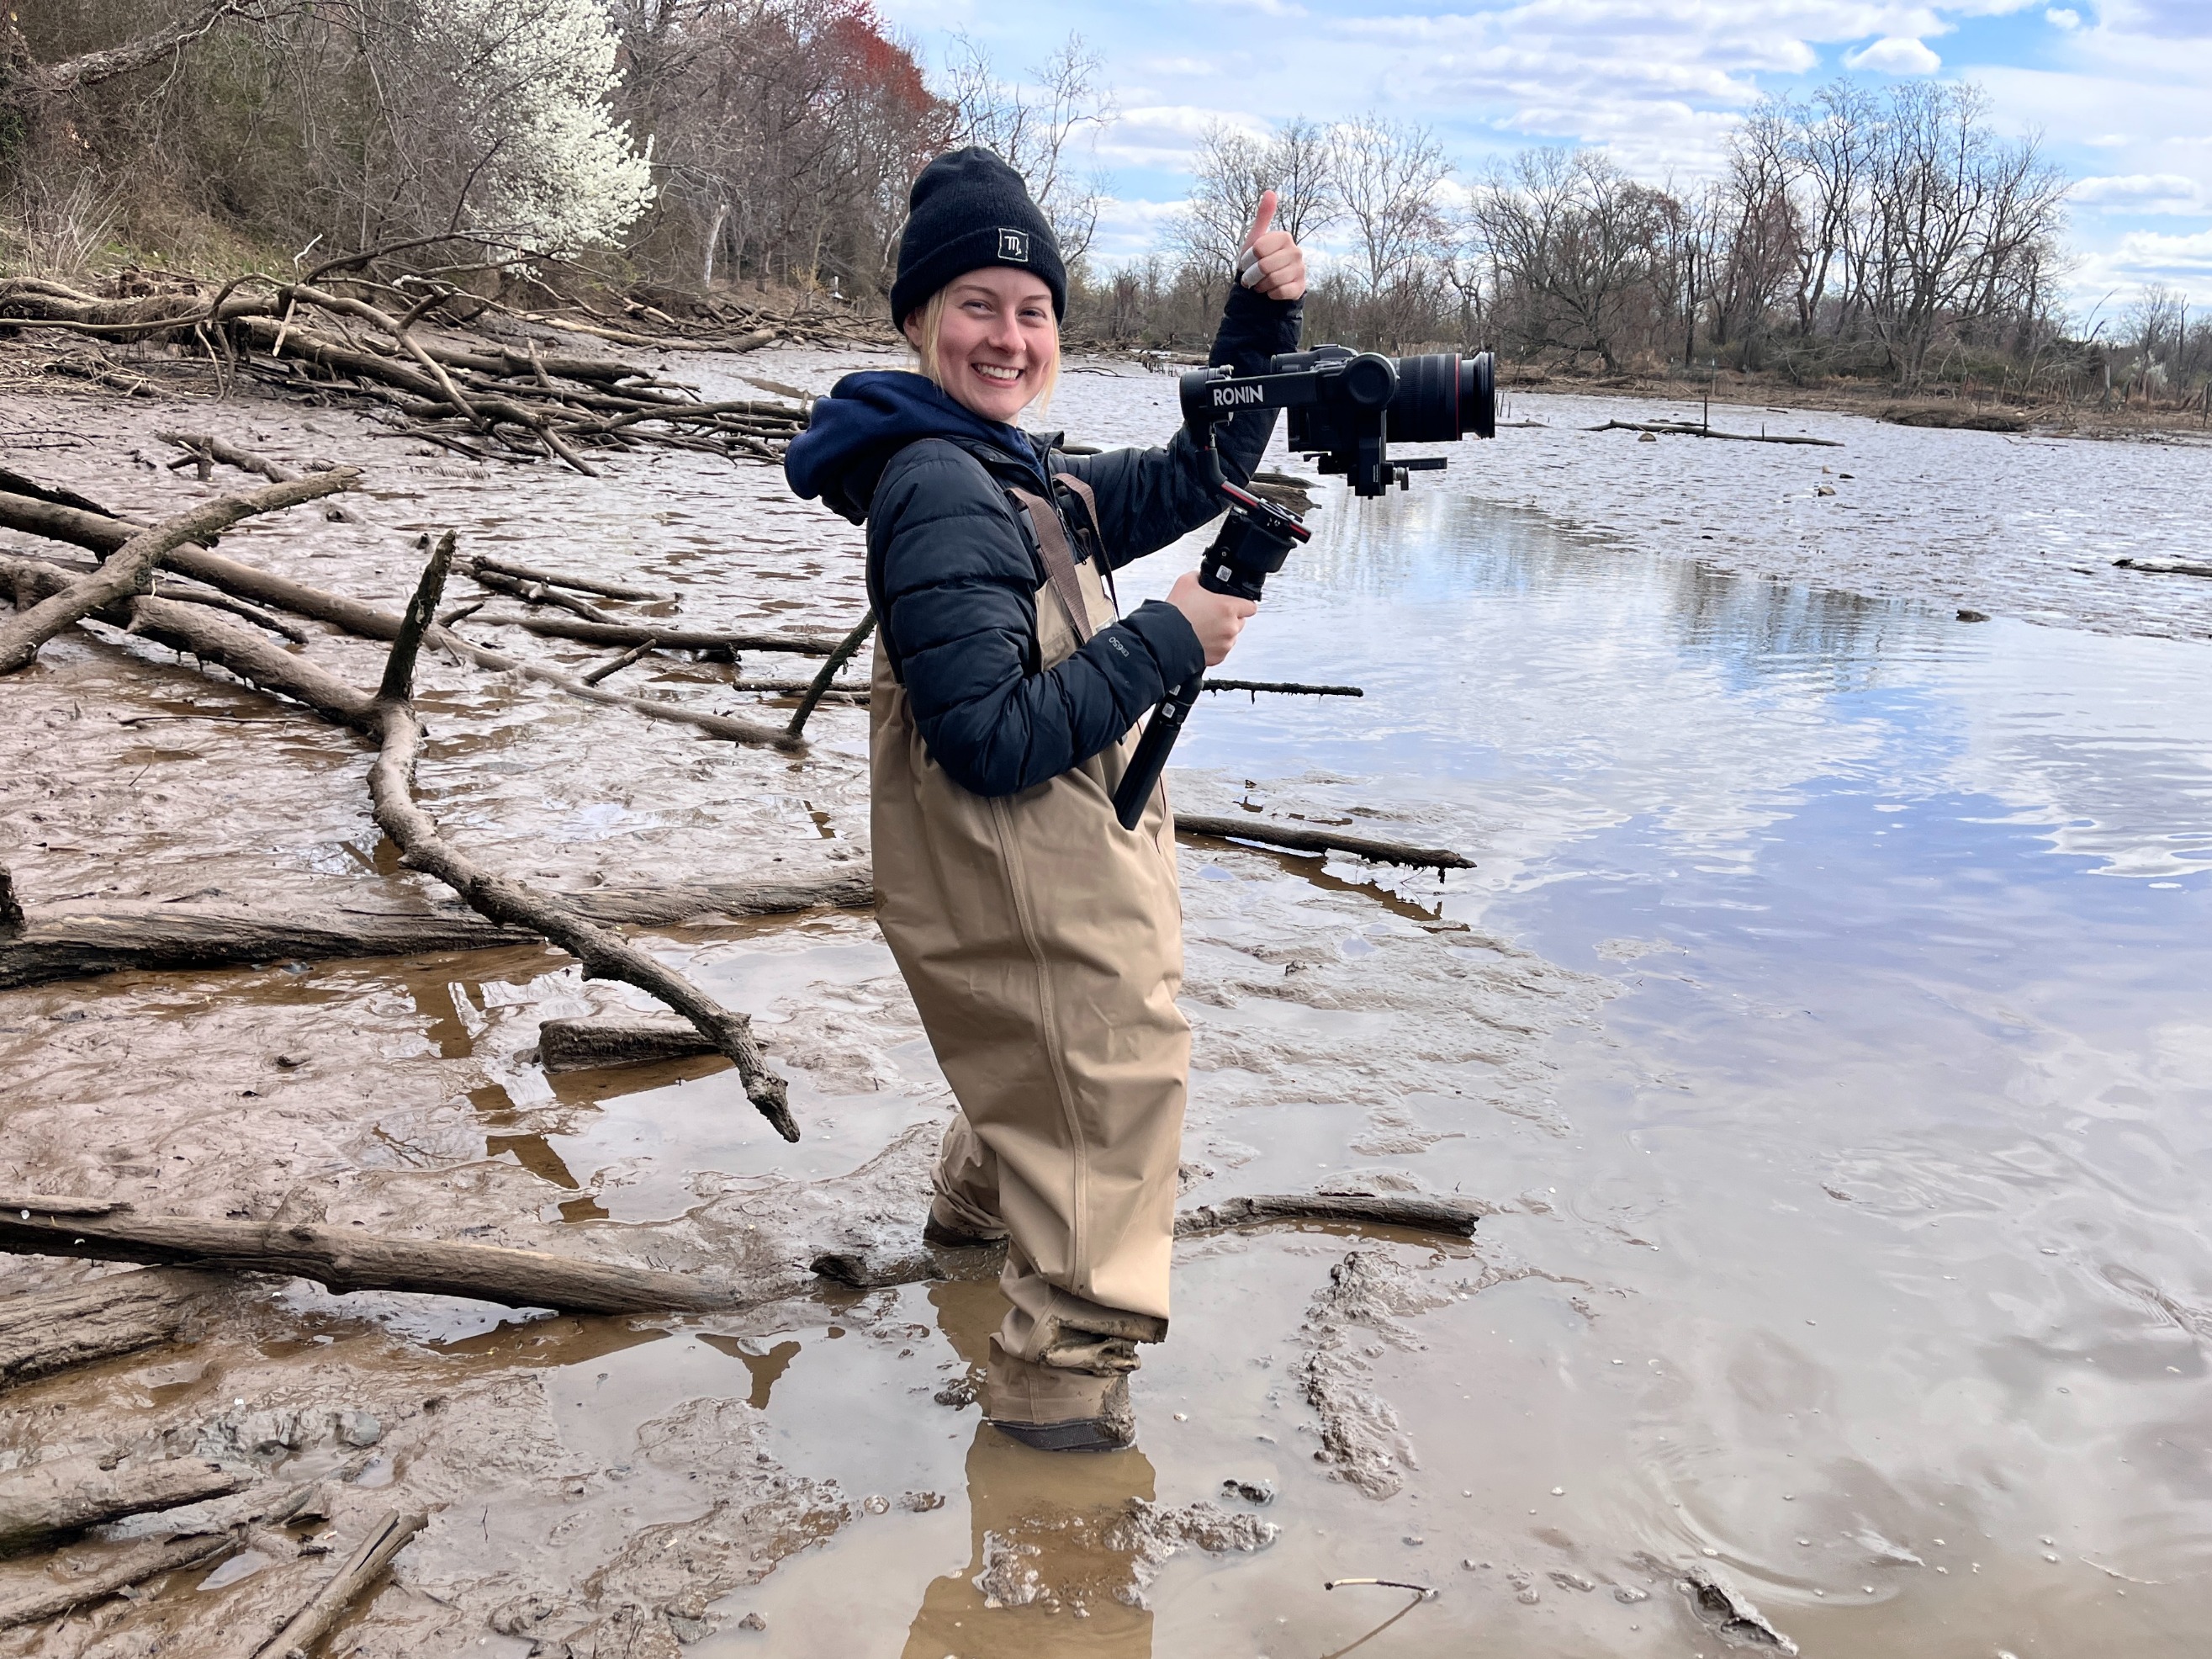 3.	Sinking into the mud on a environmental film shoot near the Anacostia River in Washington, D.C.